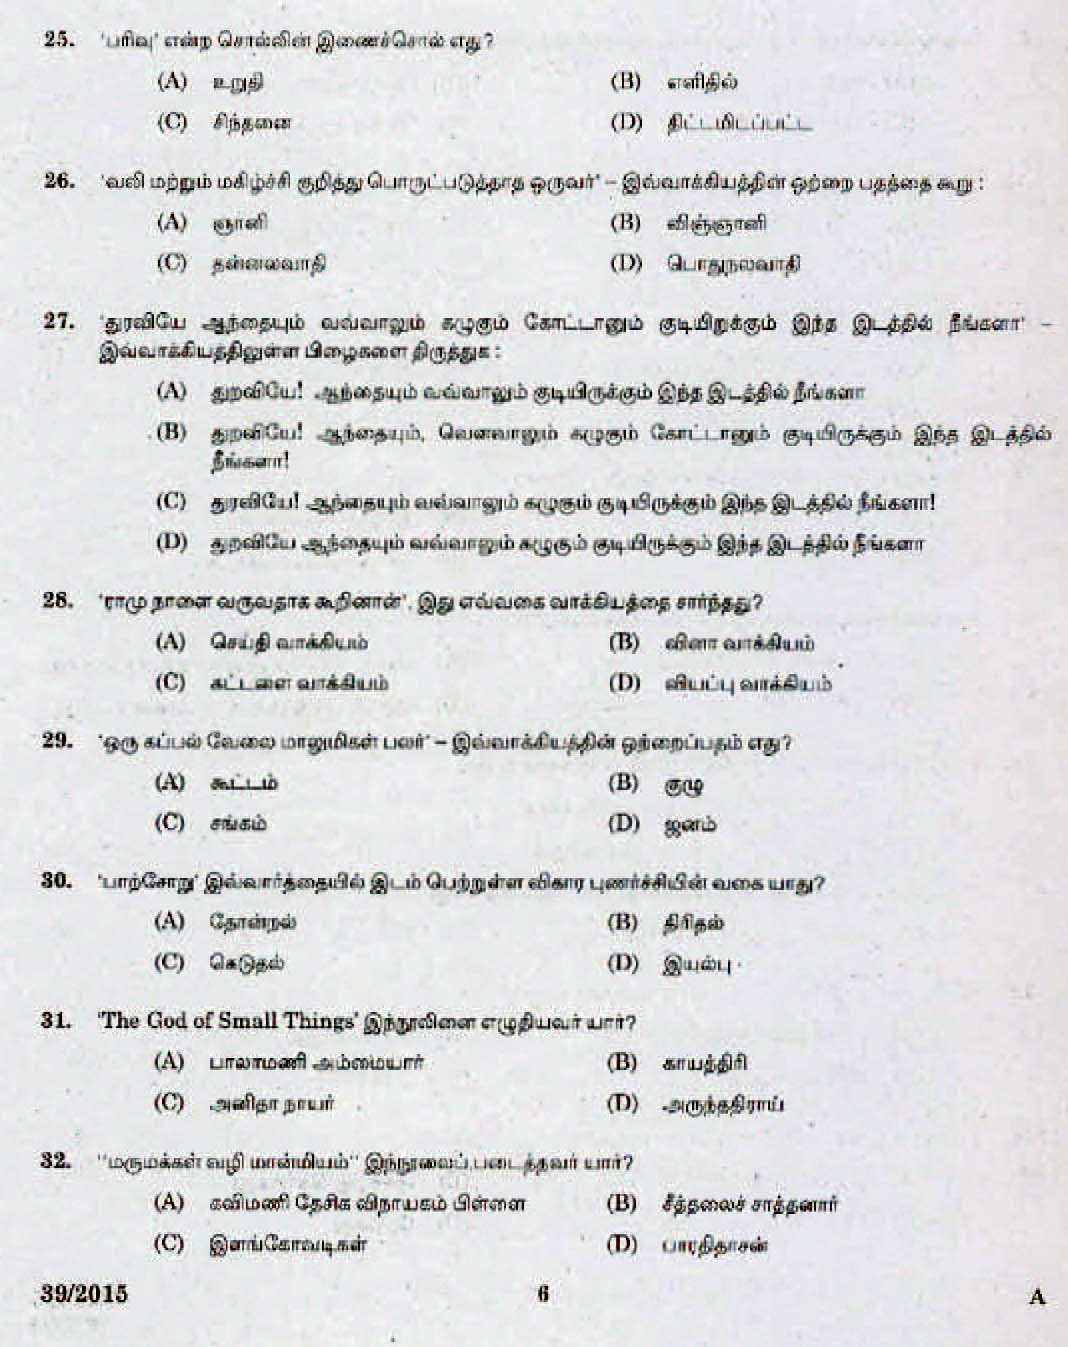 LD Clerk Various Question Paper Malayalam 2015 Paper Code 392015 4